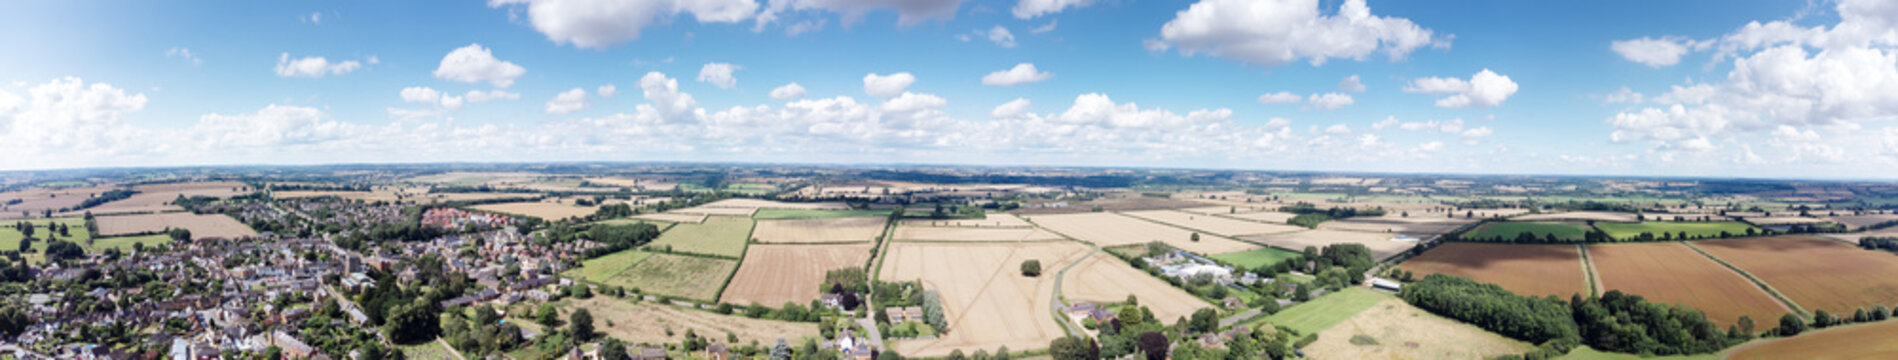 english landscape image from above